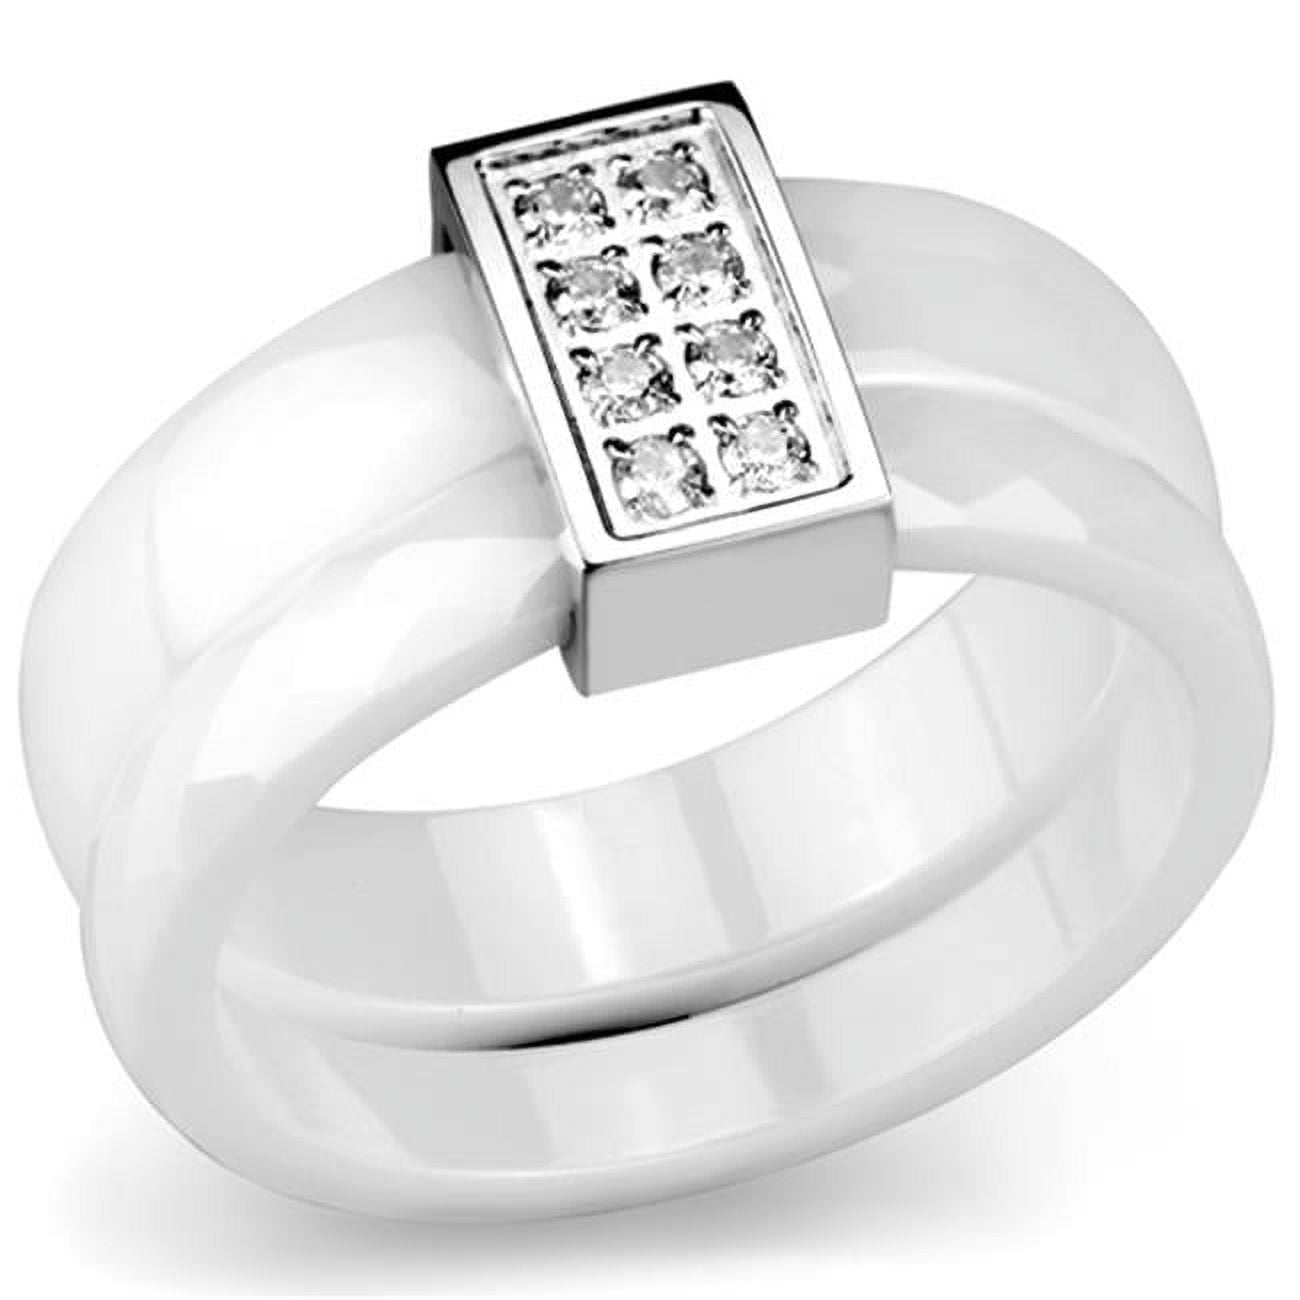 Picture of Alamode 3W979-6 Women High Polished Stainless Steel Ring with Ceramic in White - Size 6